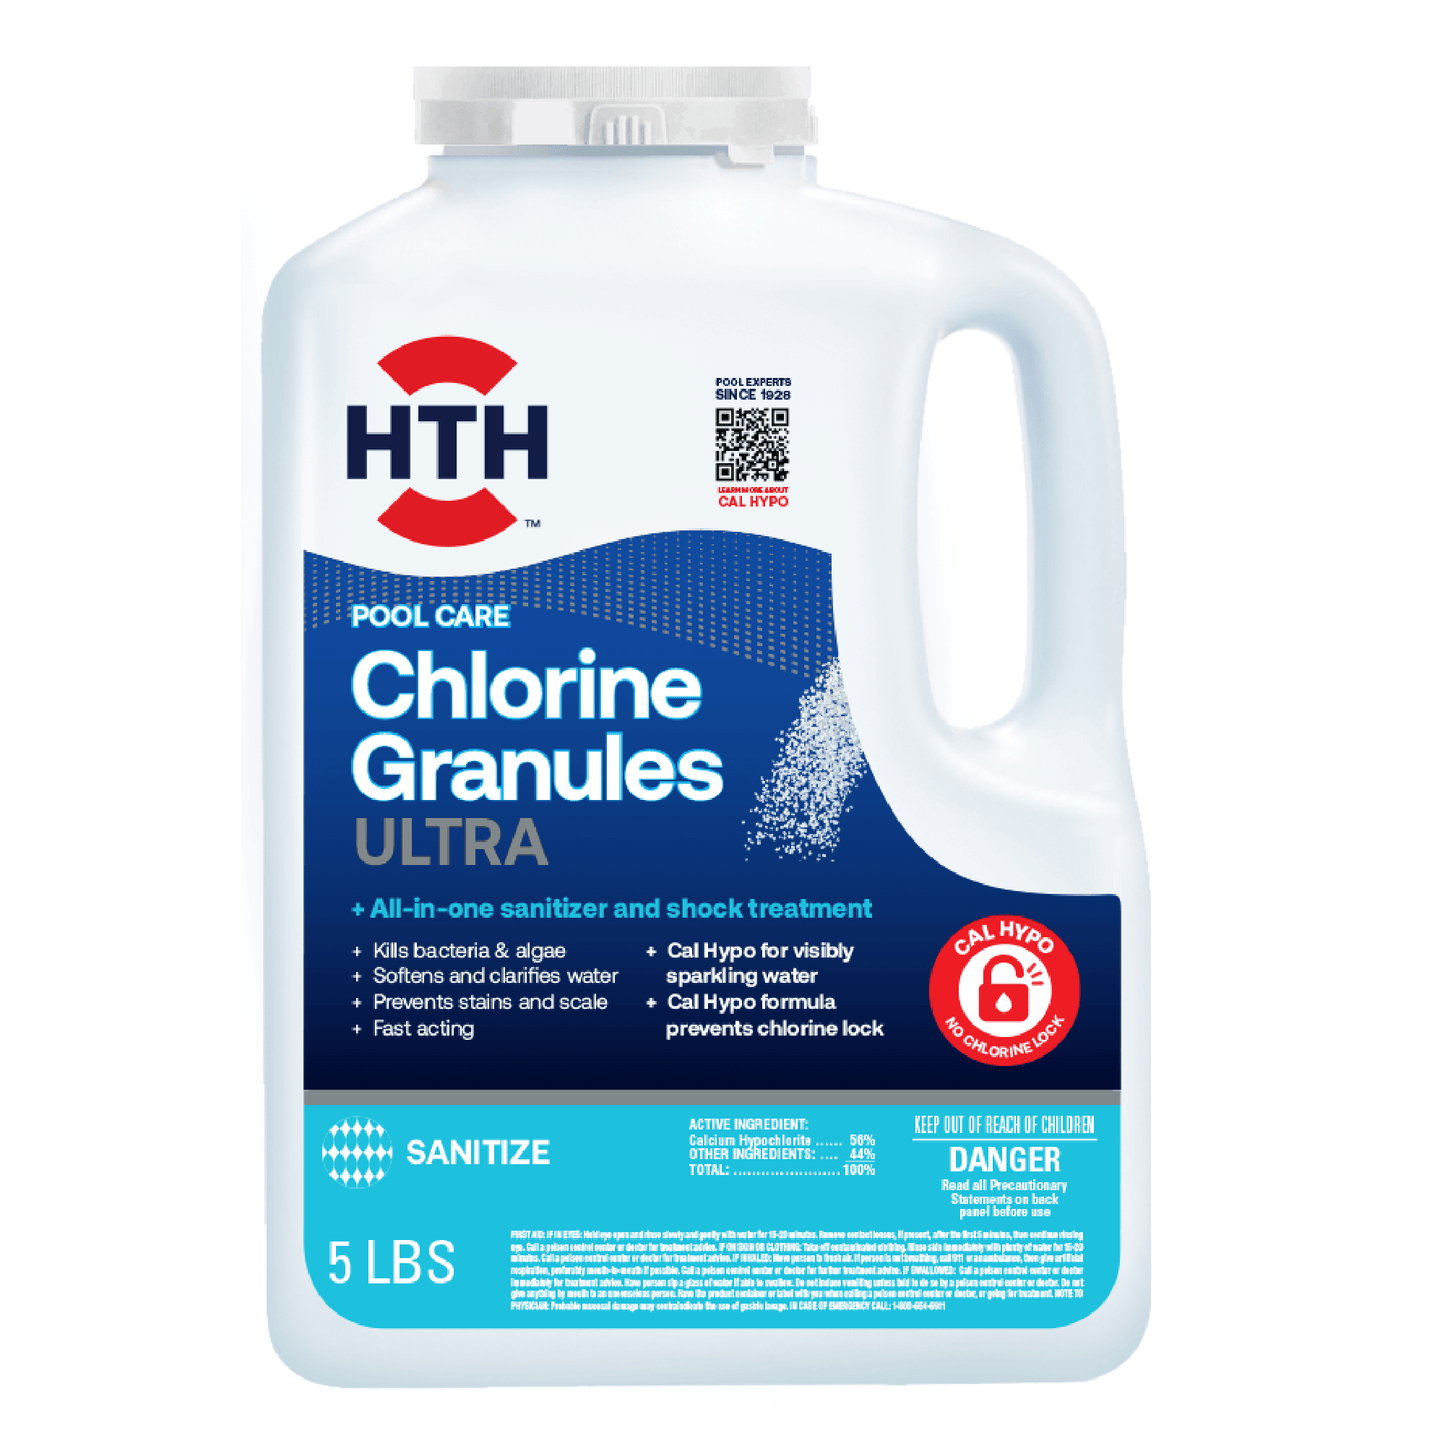 A 1 gallon plastic container of HTH Pools chlorine granules for pool treatments